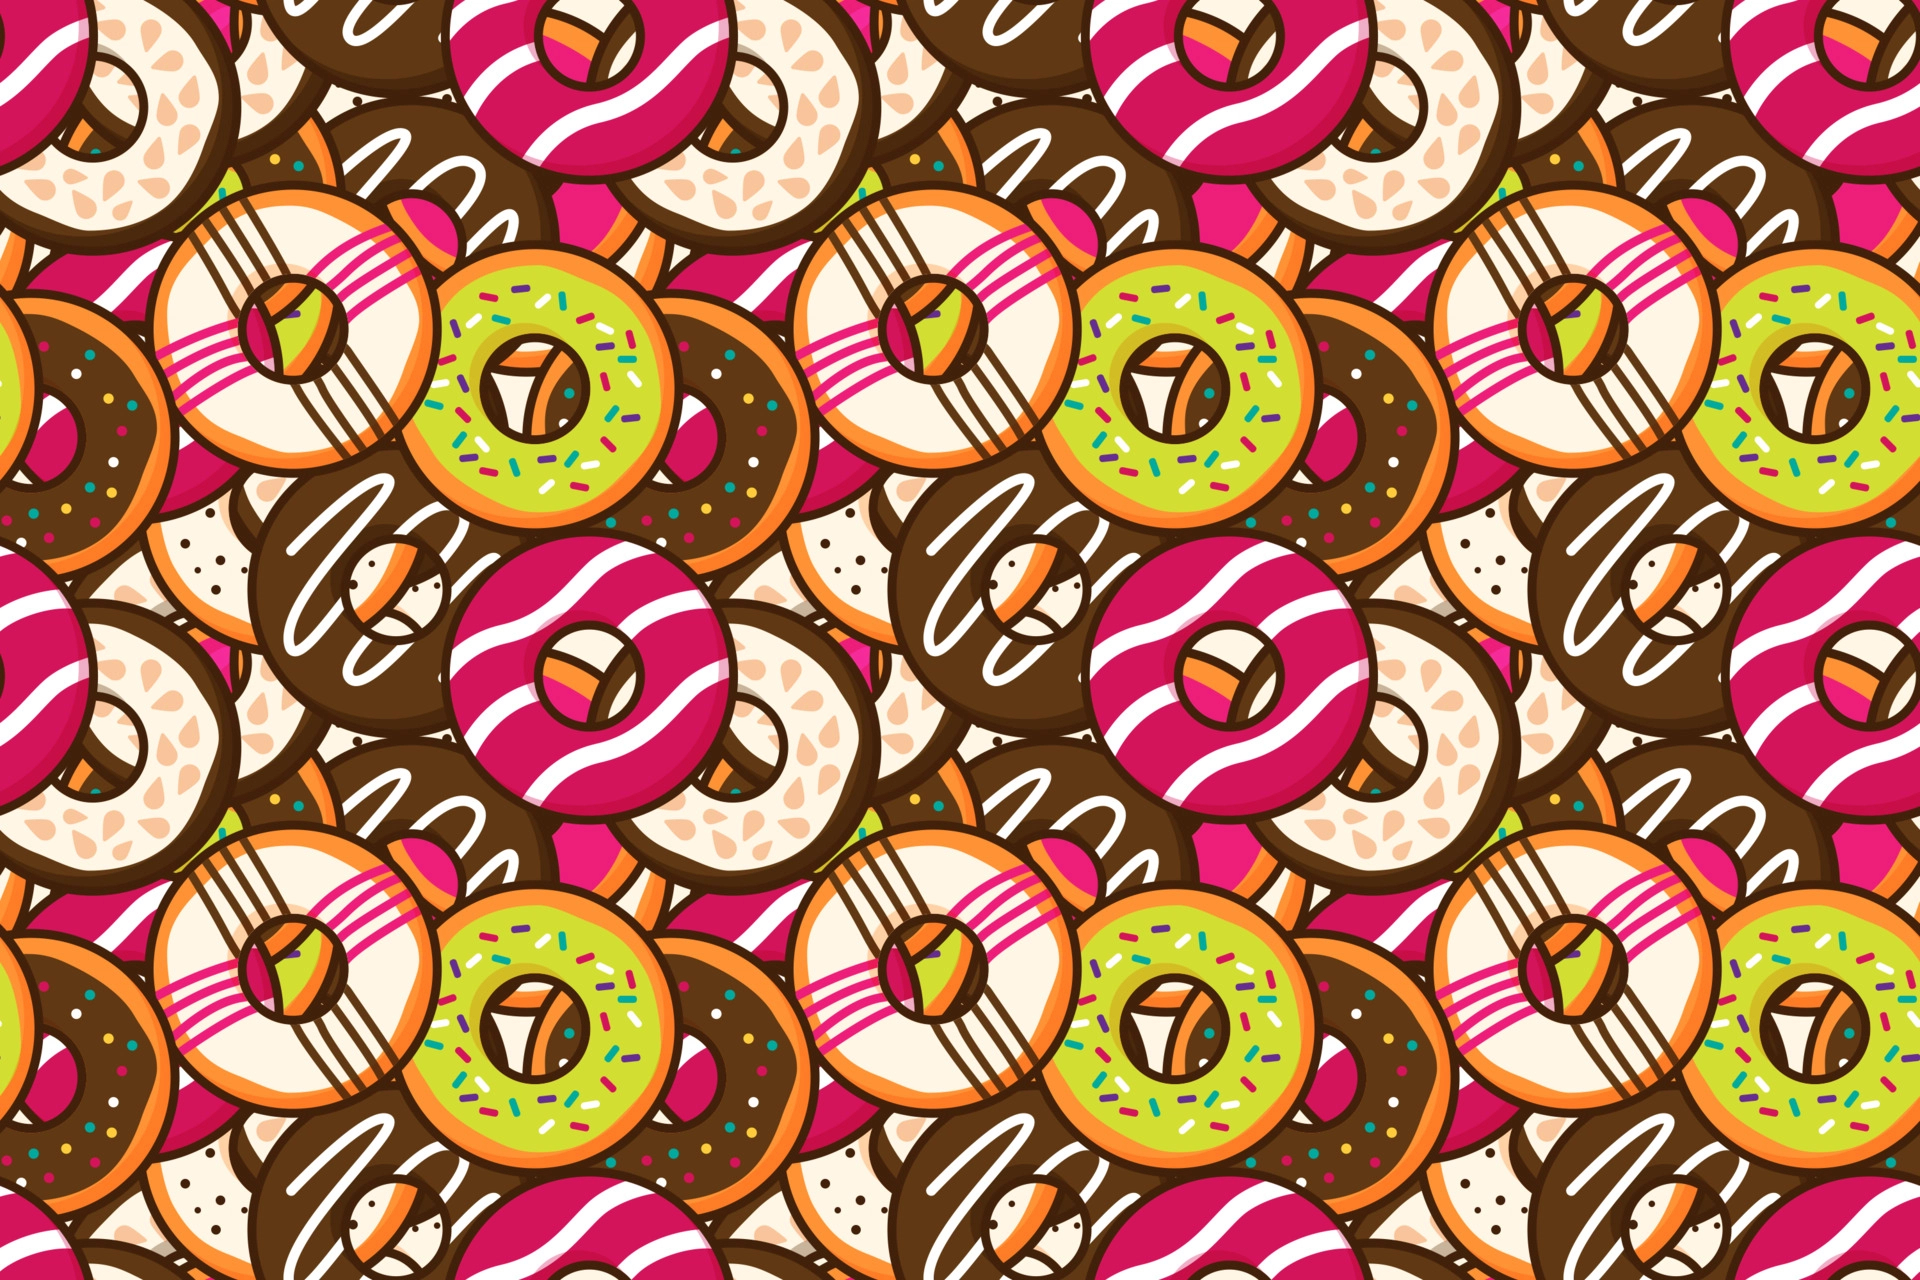 1920x1280 Group of colorful sweet donuts with glaze and sprinkles background Top view doughnut seamless pattern backdrop wallpaper Dessert and bakery concept Trendy cute cartoon food free vector illustration 3565493 Vector Art at